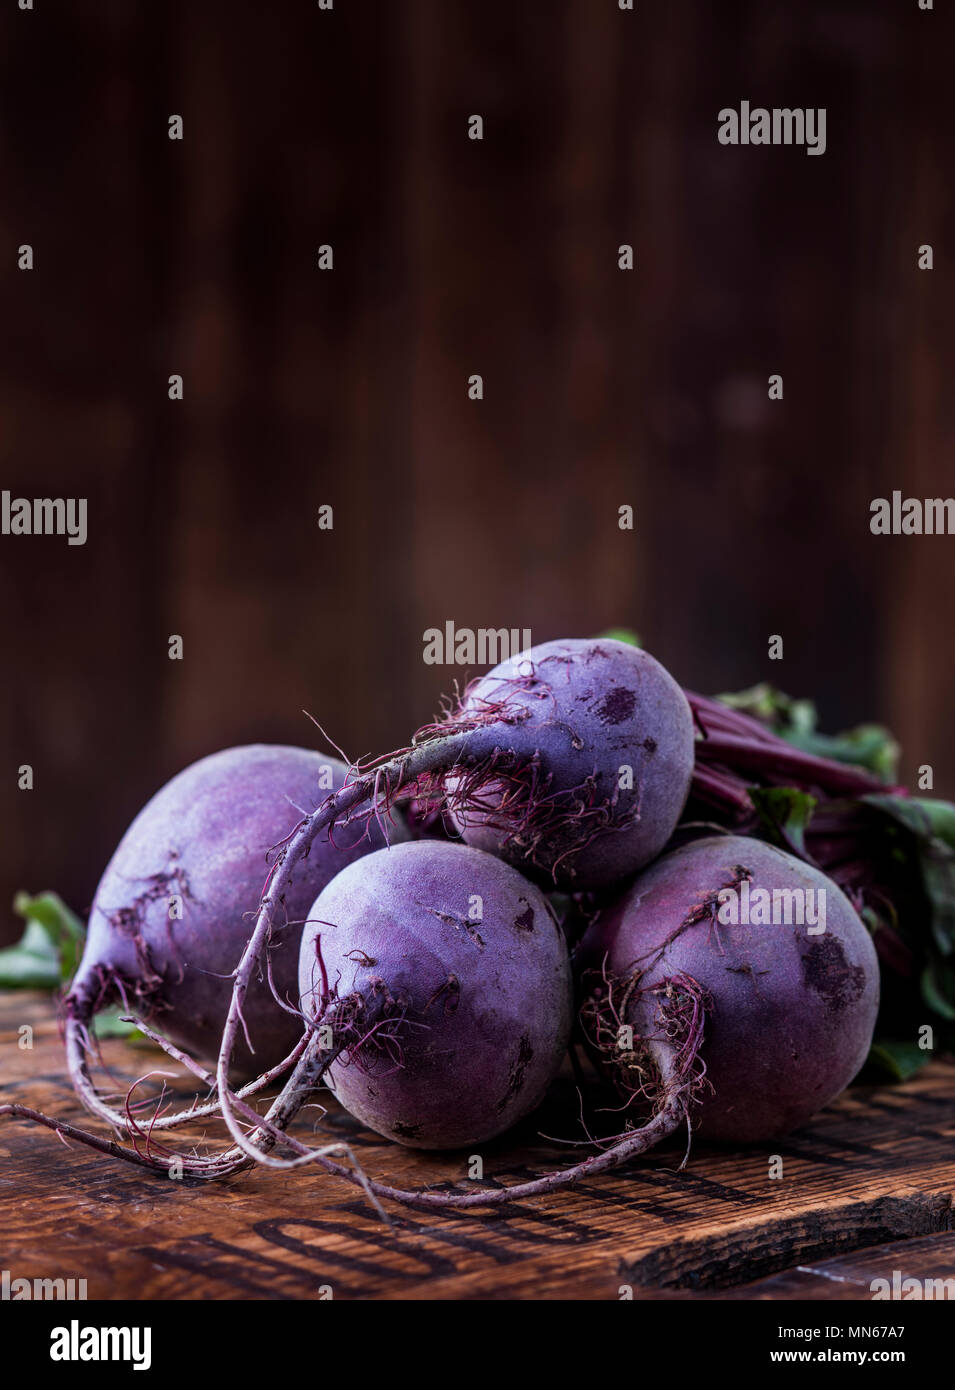 Raw beetroot bunch on a wooden surface Stock Photo